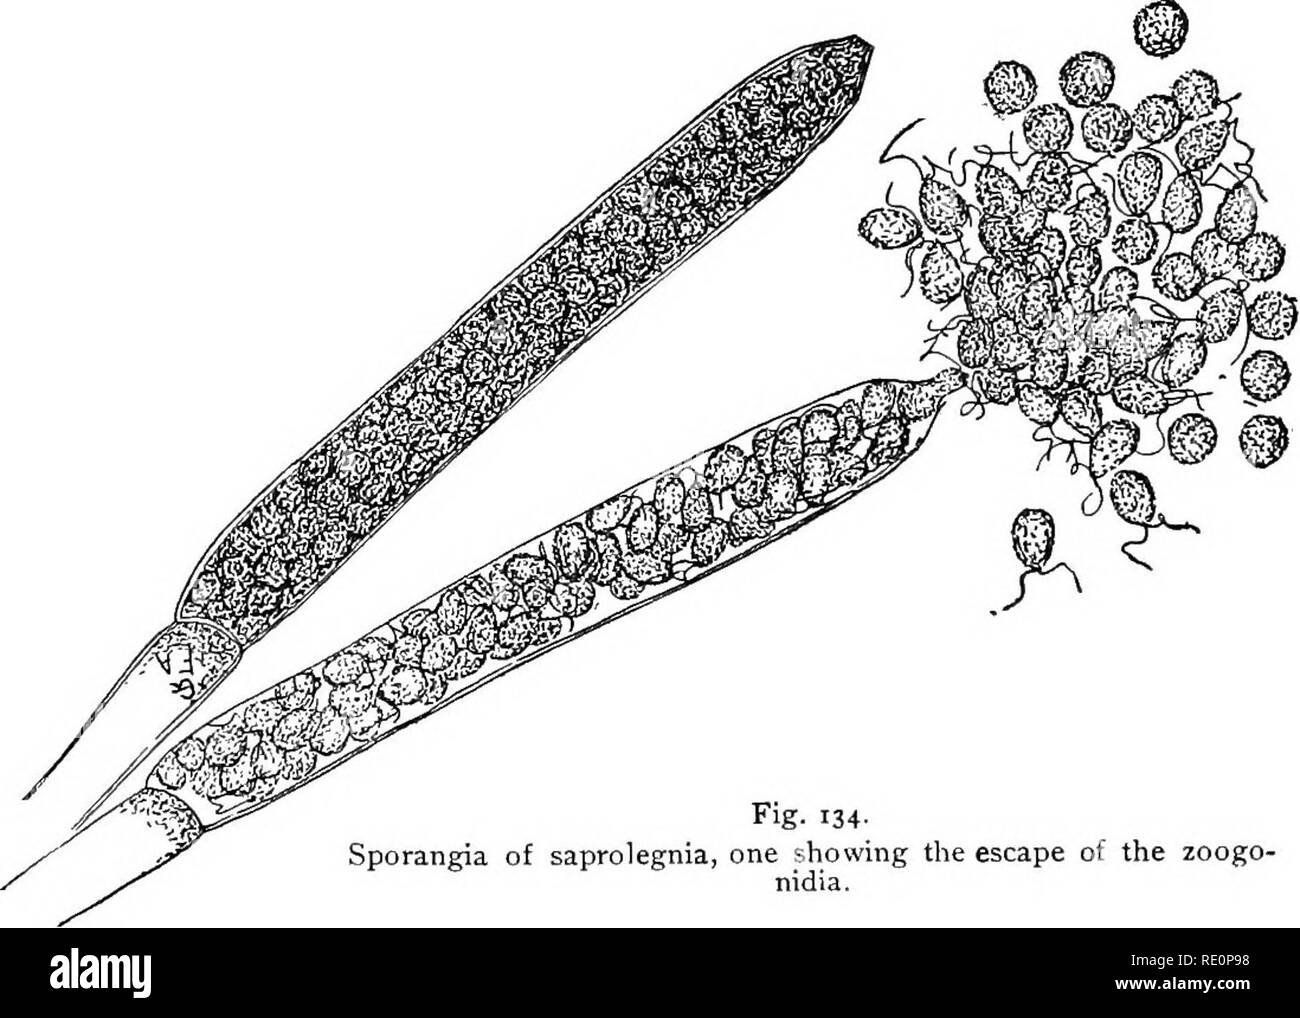 . Elementary botany. Botany. 124 MOKPHOLOG V. ordinary threads of the mycelium. Some of the threads should be mounted in fresh water. Search for some of those which. Fig- 134- Sporangia of saprolegnia, one showing the escape of the zoogo- nidia. show that the protoplasm is divided up into a great number of small areas, as shown in fig. 134. With the low power we should watch some of the older ap- pearing ones, and if after a few minutes they do not open, other preparations should be made. 282. Zoogonidia of saprolegnia.—The sporangium opens at Fig- 135- Branch of saprolegnia showing oogonia wi Stock Photo